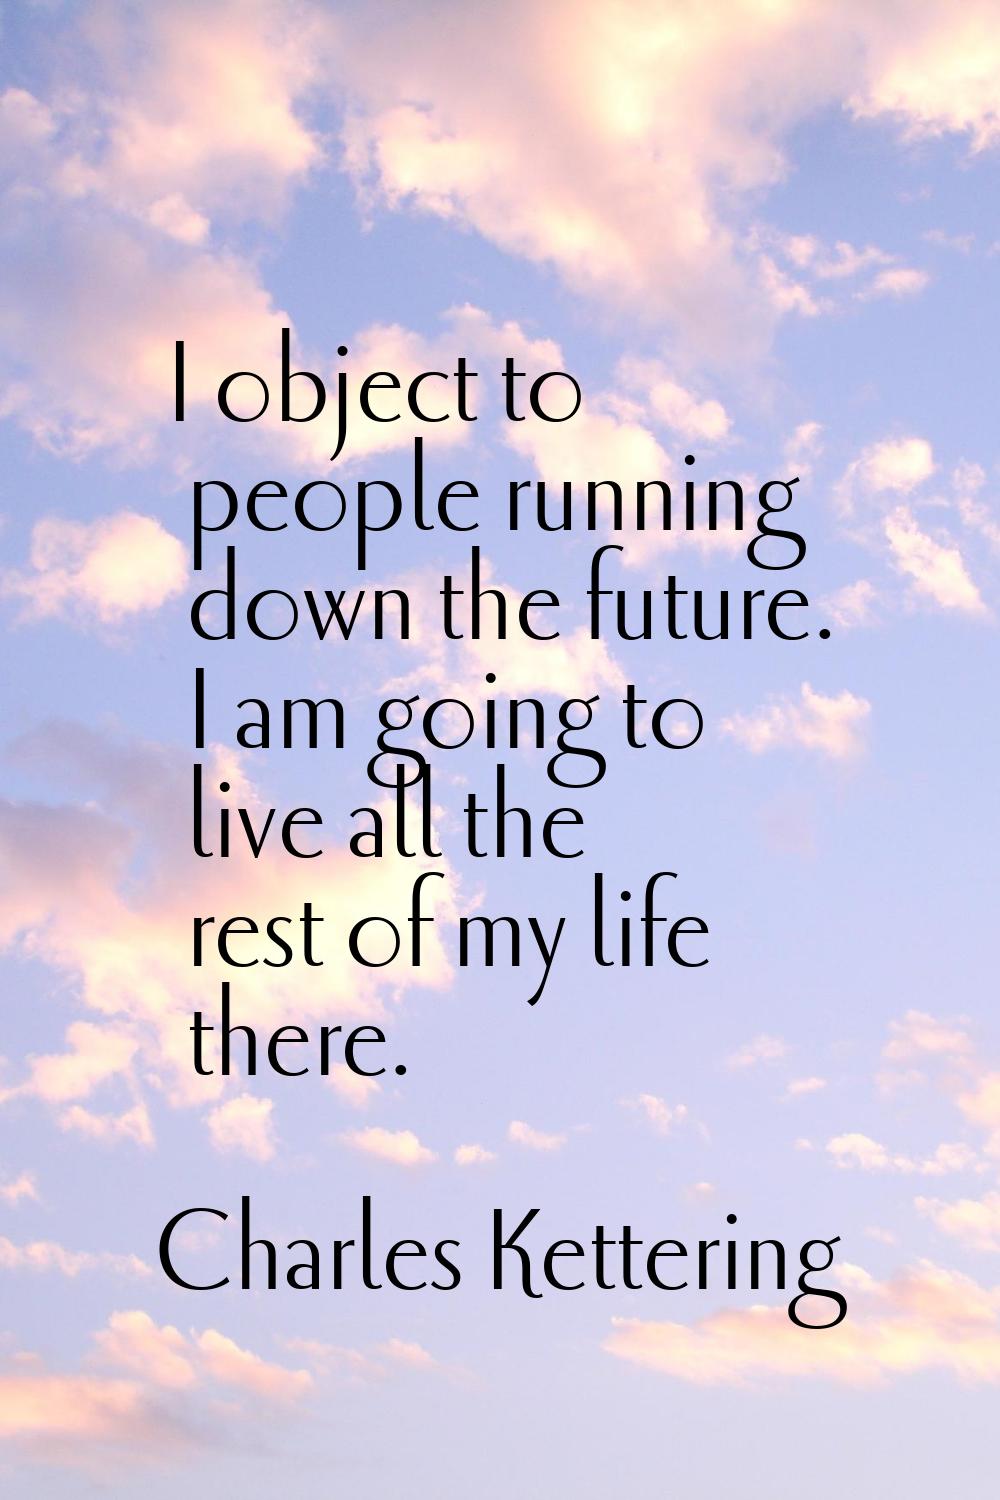 I object to people running down the future. I am going to live all the rest of my life there.